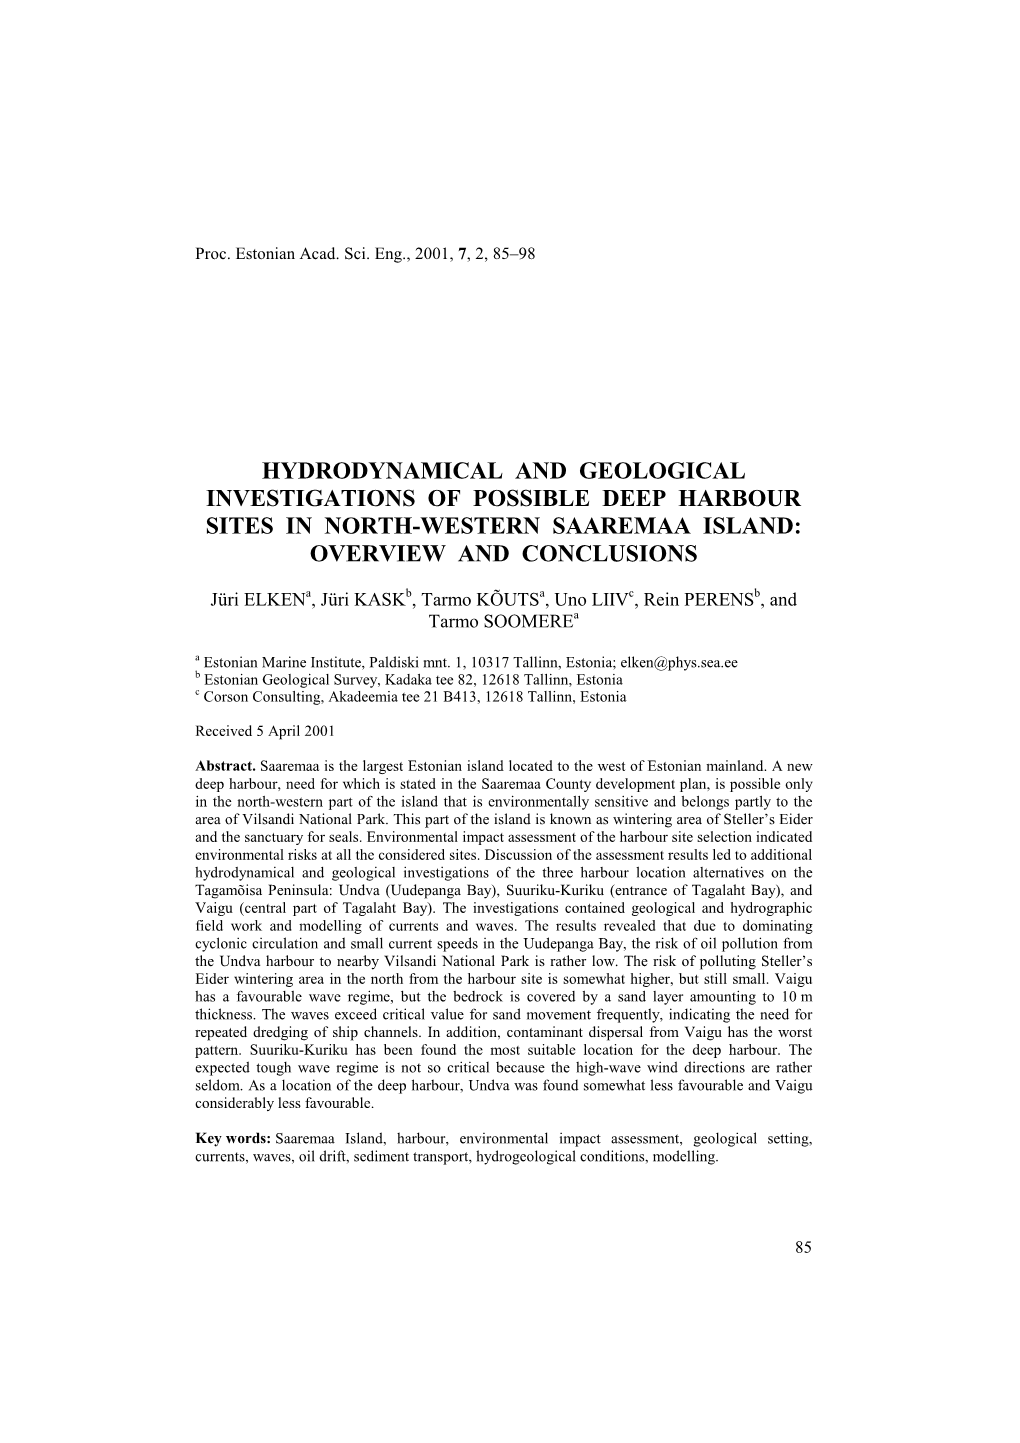 Hydrodynamical and Geological Investigations of Possible Deep Harbour Sites in North-Western Saaremaa Island: Overview and Conclusions